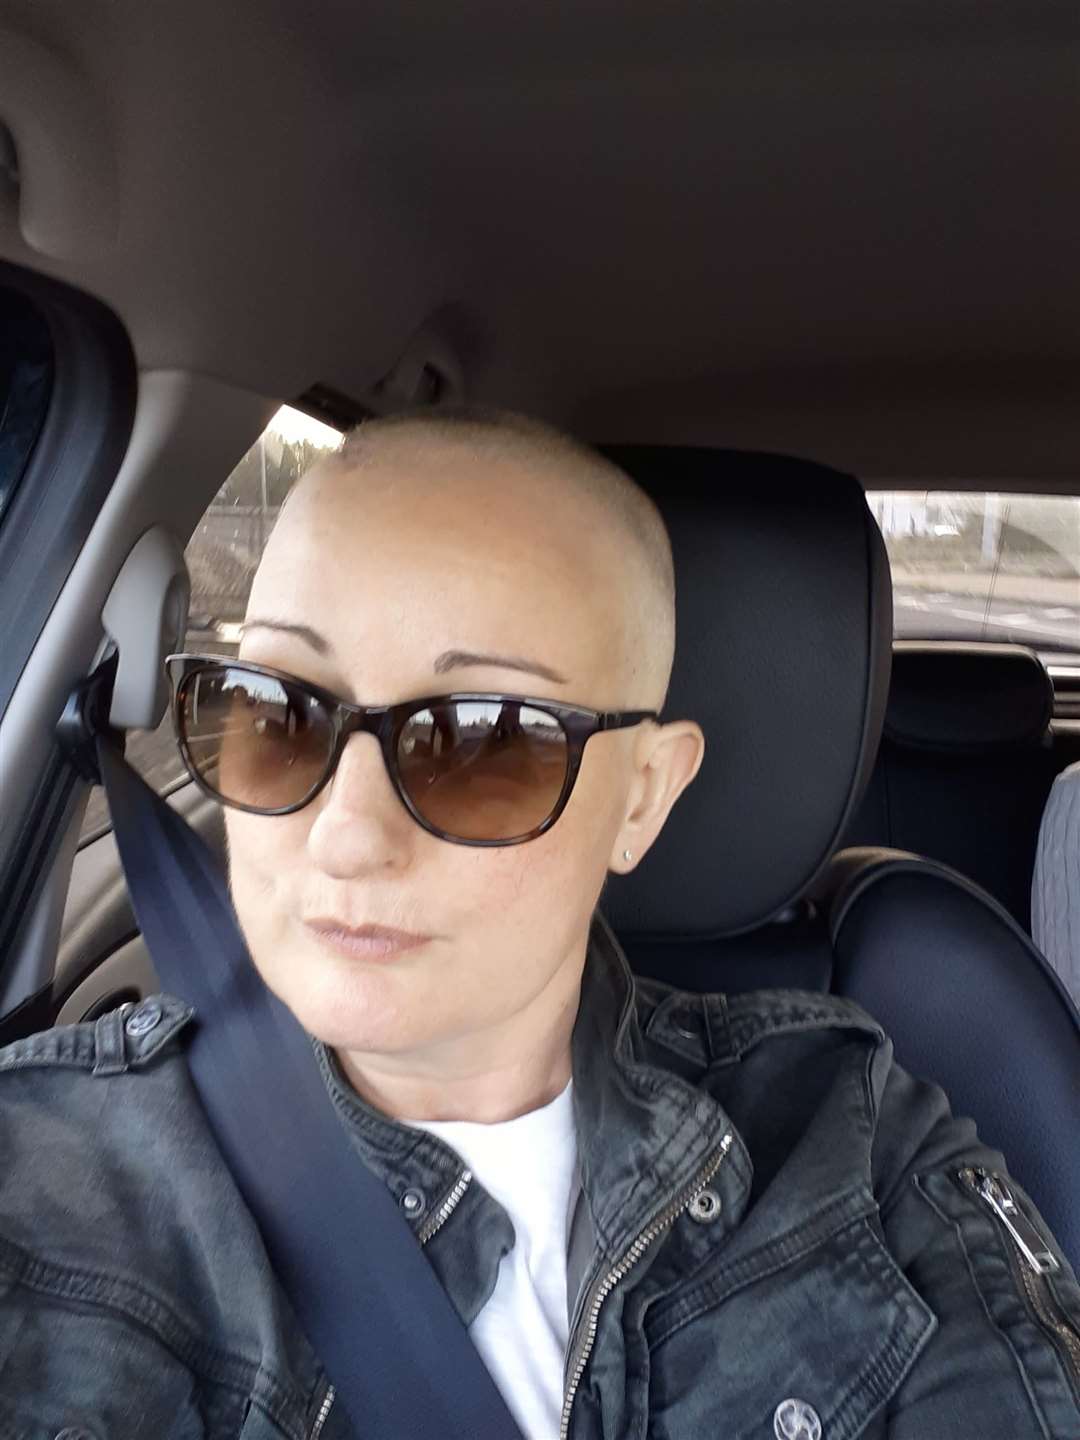 Natalie shaved her head after she began losing her hair